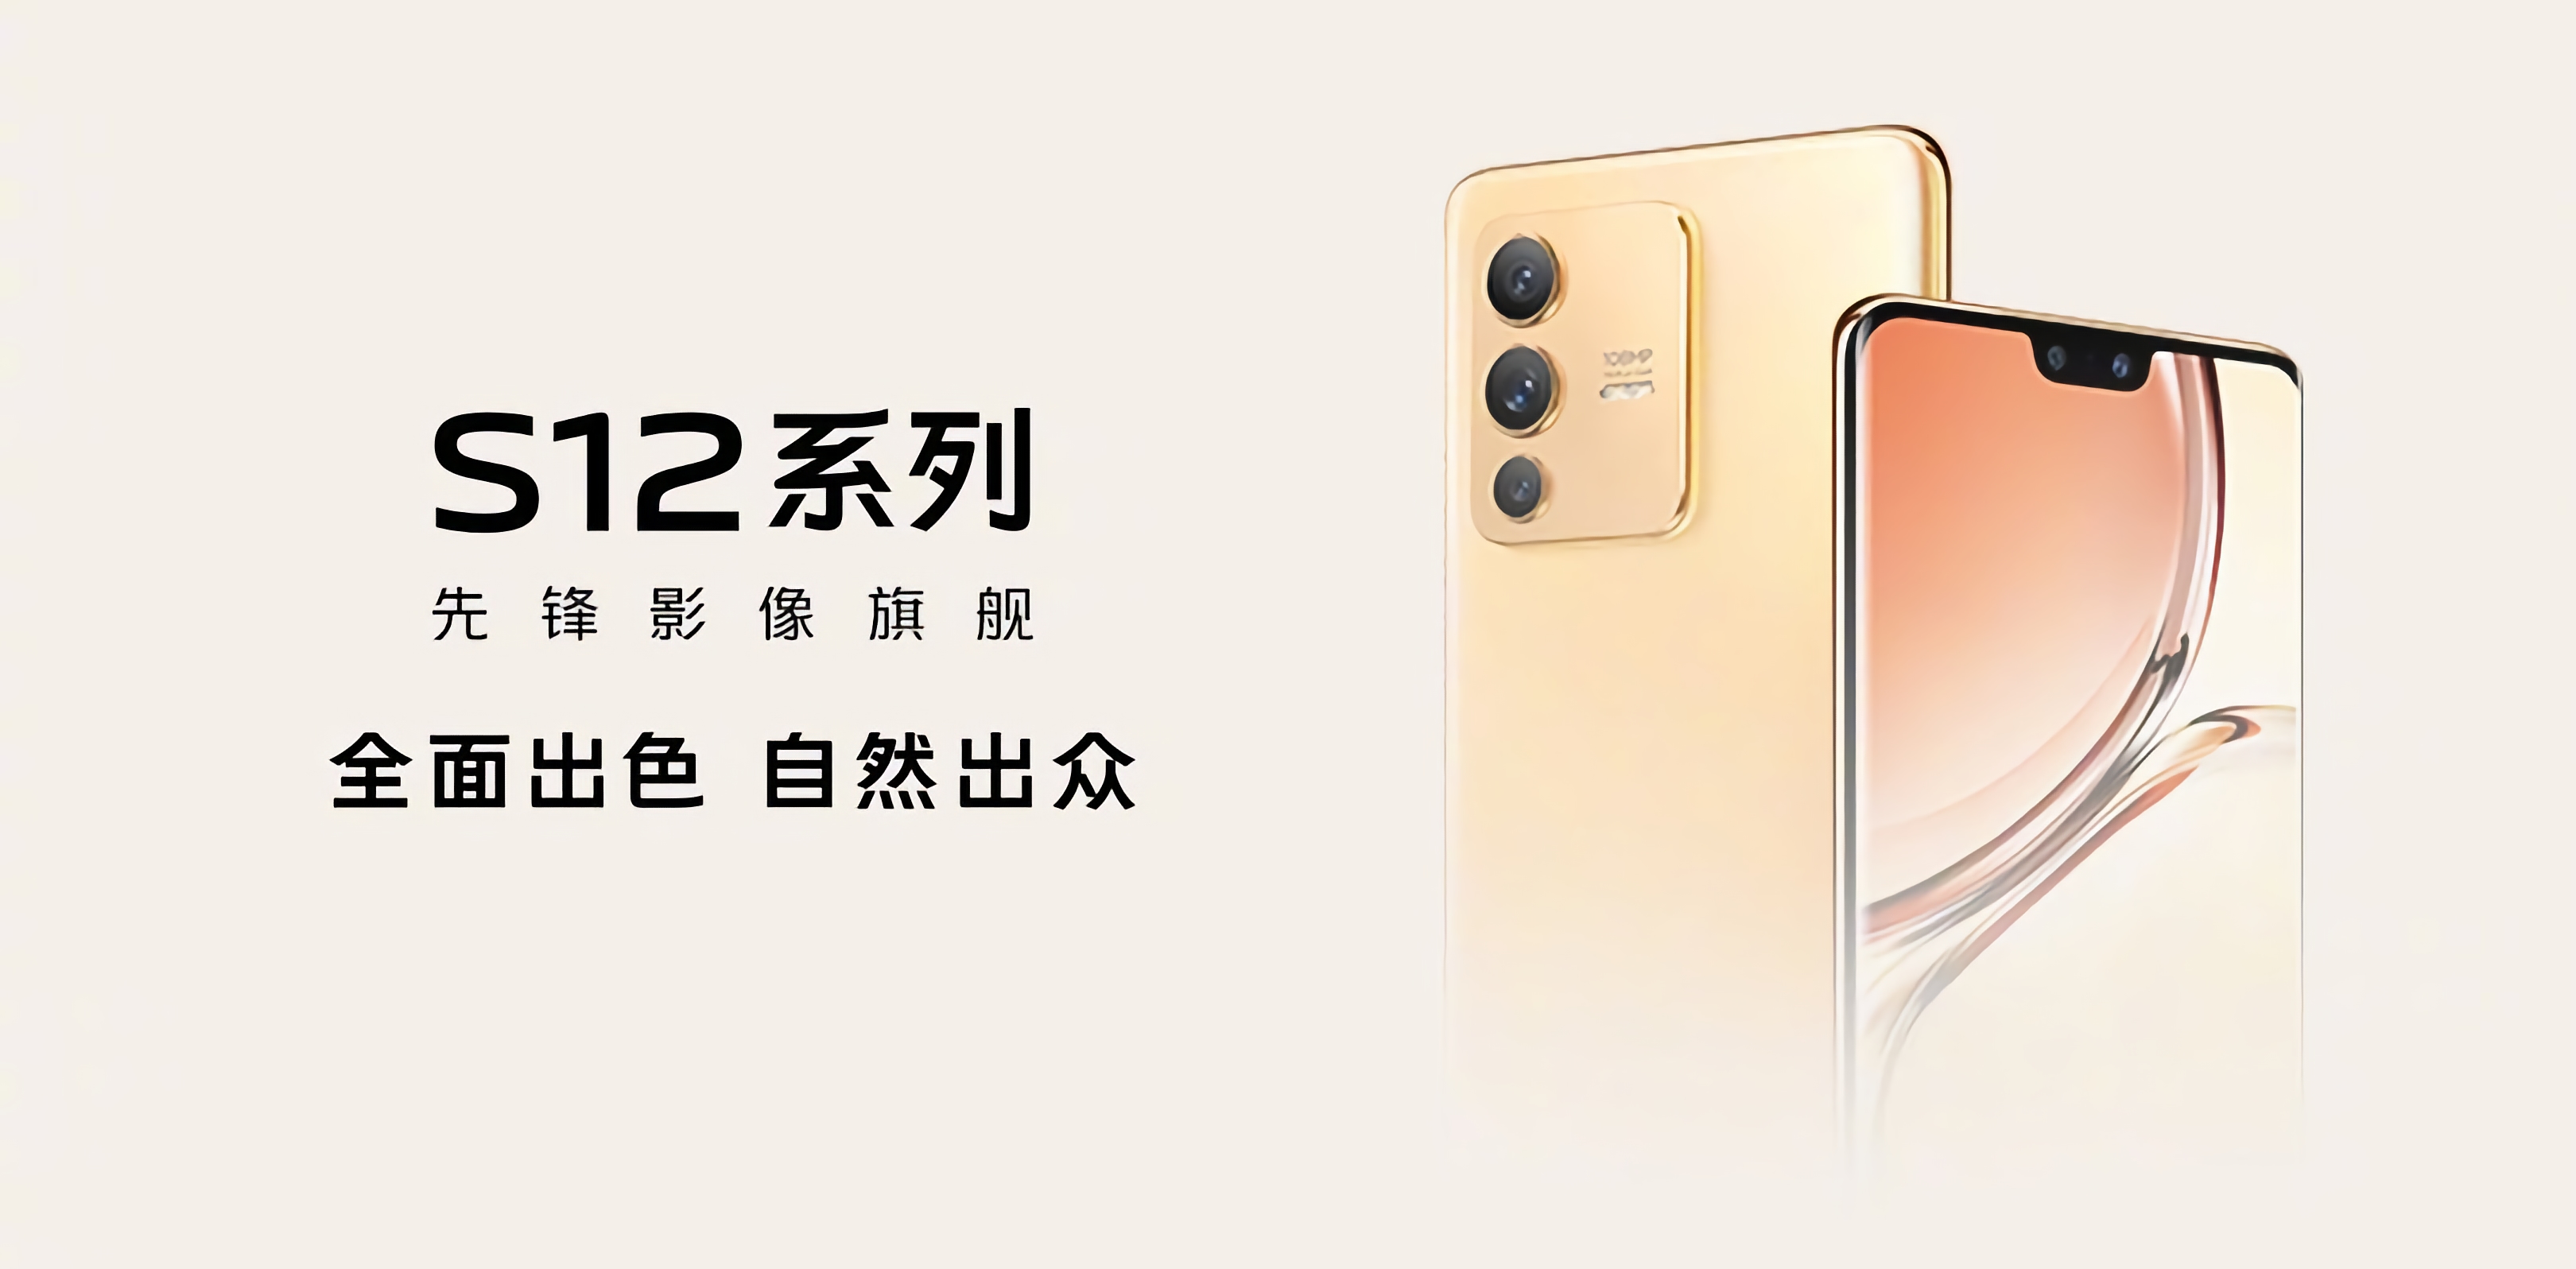 6.5 ″ OLED display, Dimensity 1200 chip and 108 MP camera: detailed specifications of Vivo S12 Pro hit the network before the announcement